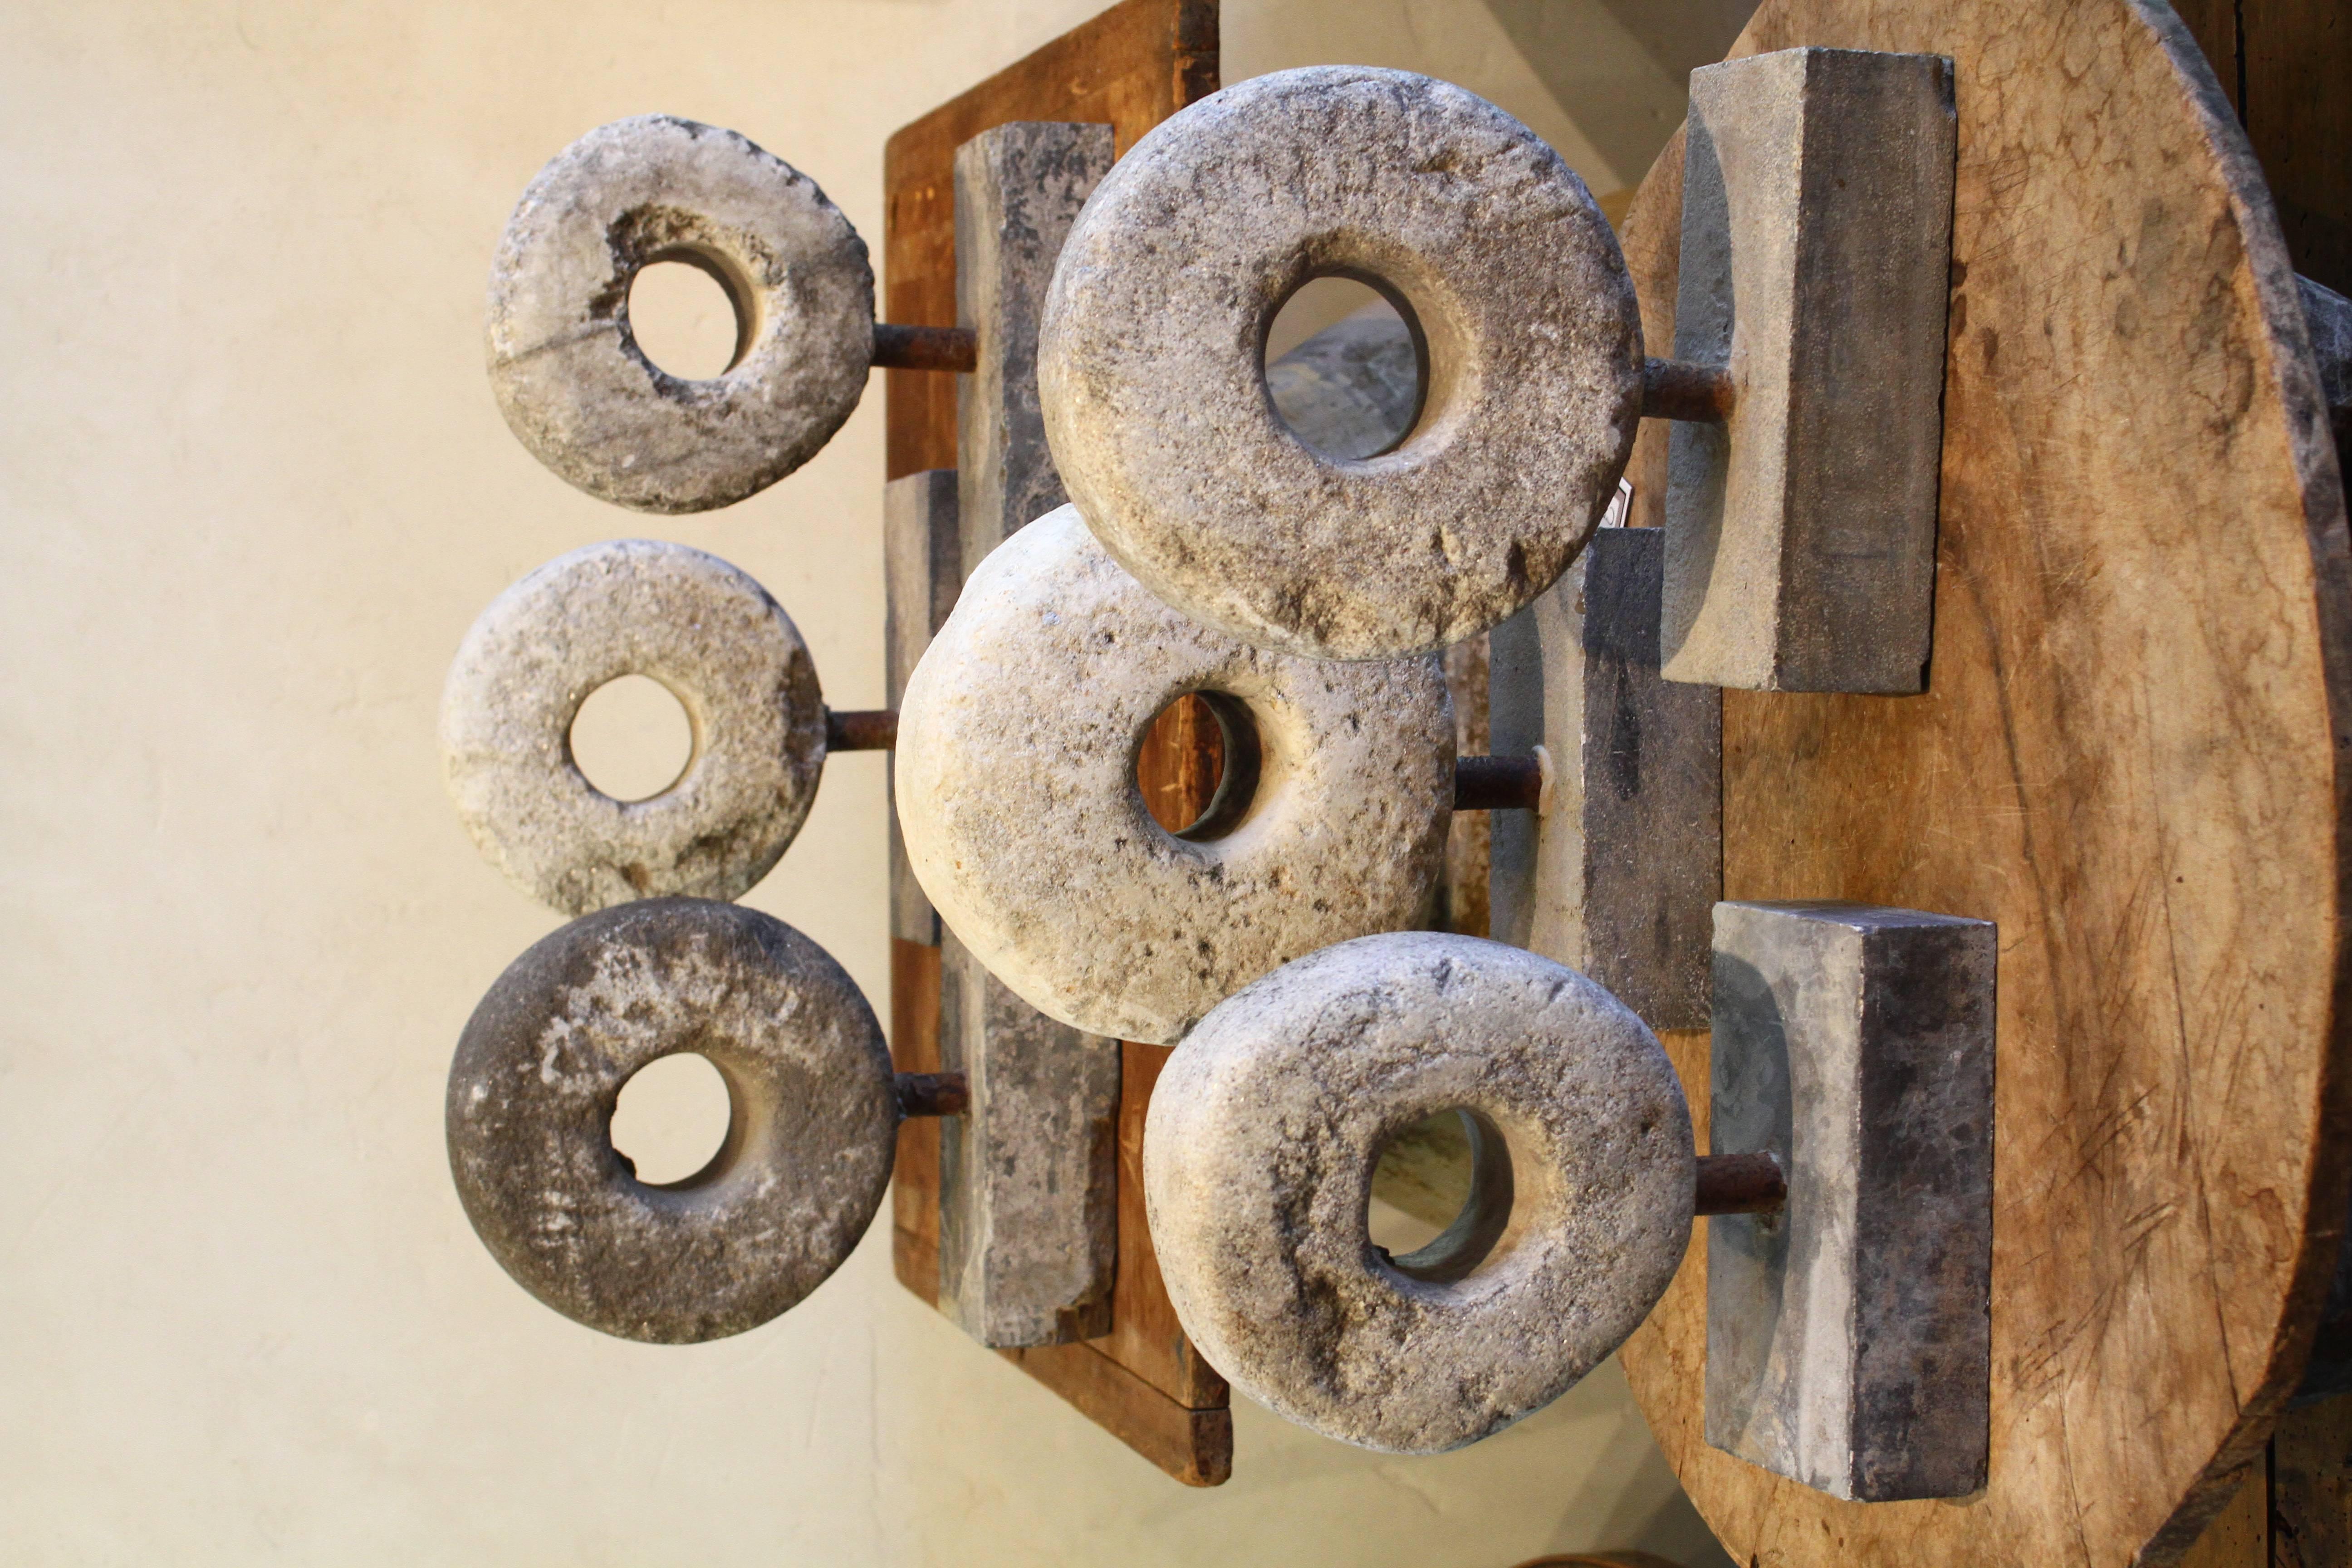 These one of a kind antique small millstones are carved stone spheres and add the perfect industrial piece to the decor puzzle.